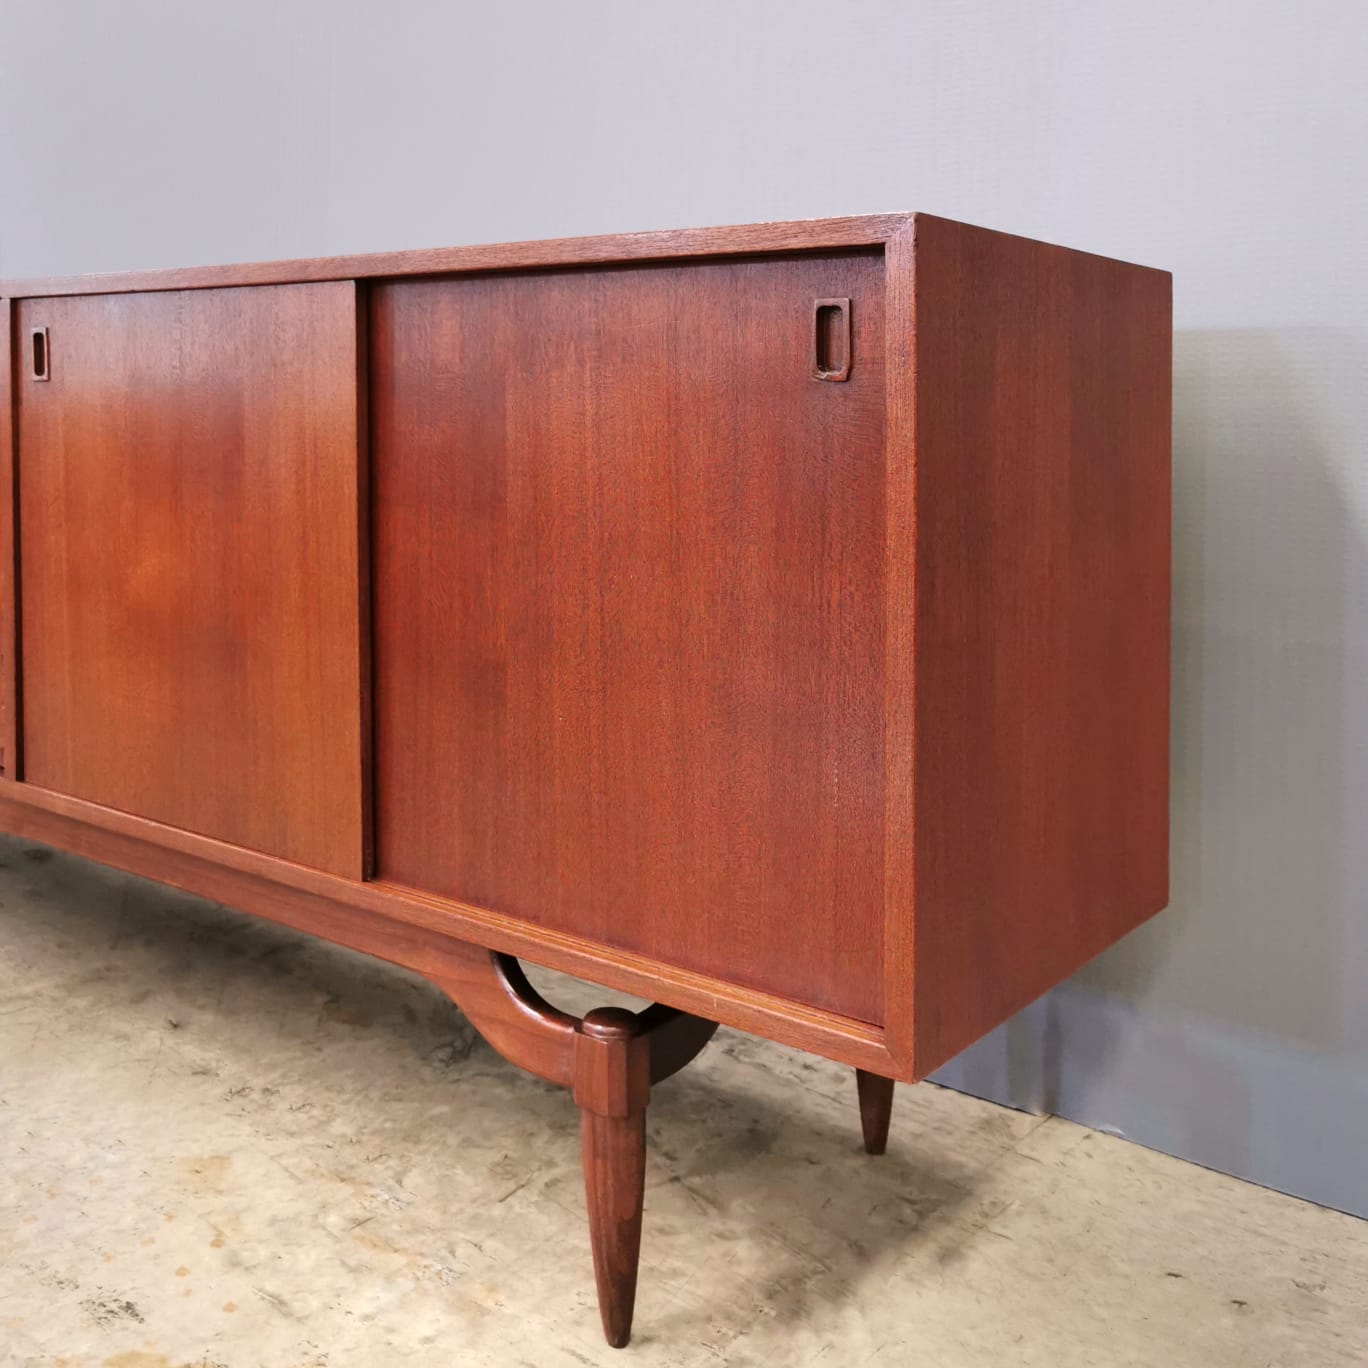 Vintage Sideboard from the 50s and 60s in Teak